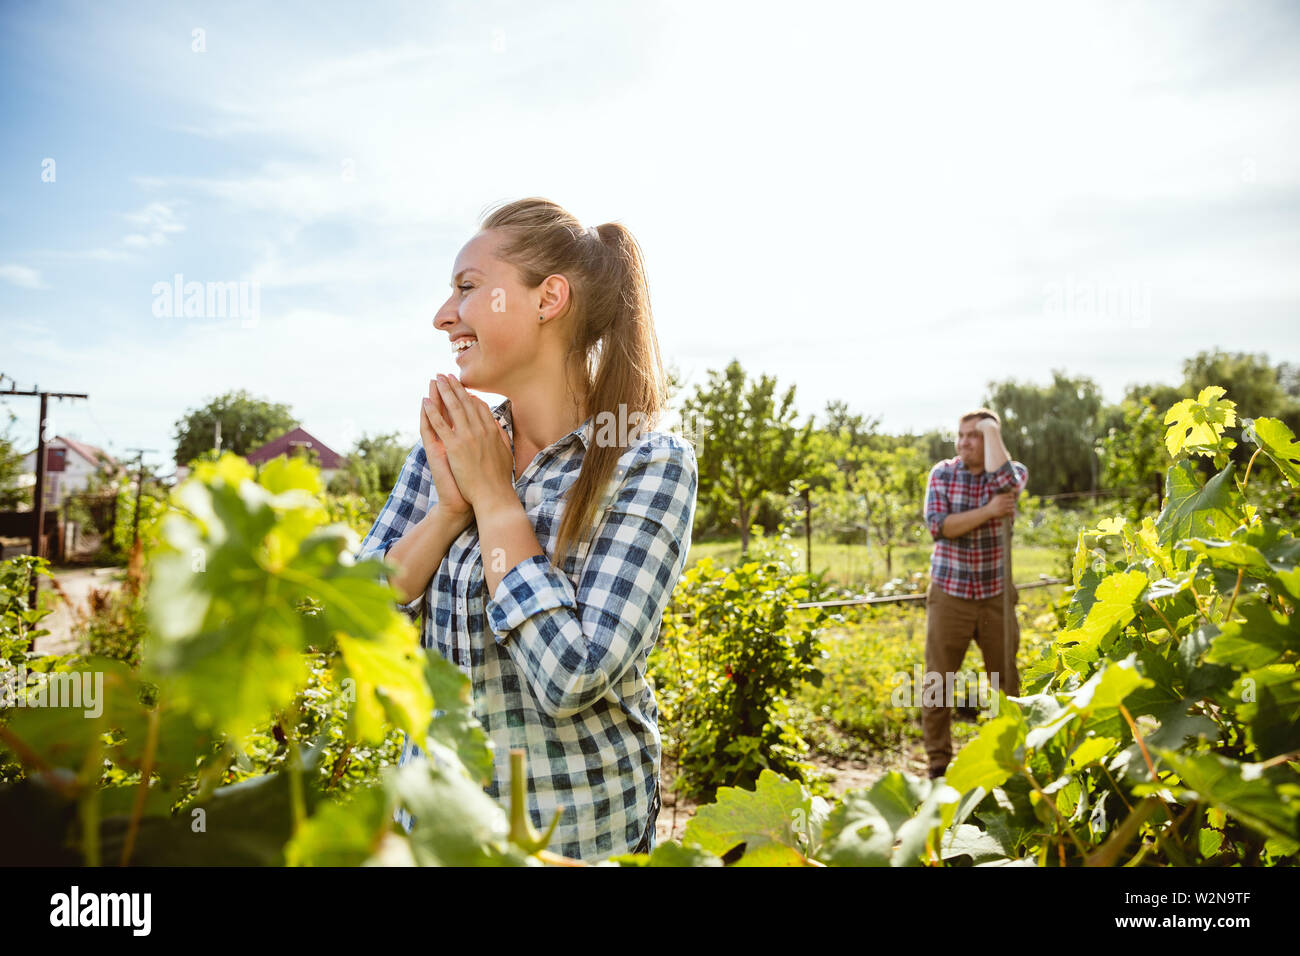 Young and happy farmer's couple at their garden in sunny day. Man and woman engaged in the cultivation of eco friendly products. Concept of farming, agriculture, healthy lifestyle, family occupation. Stock Photo